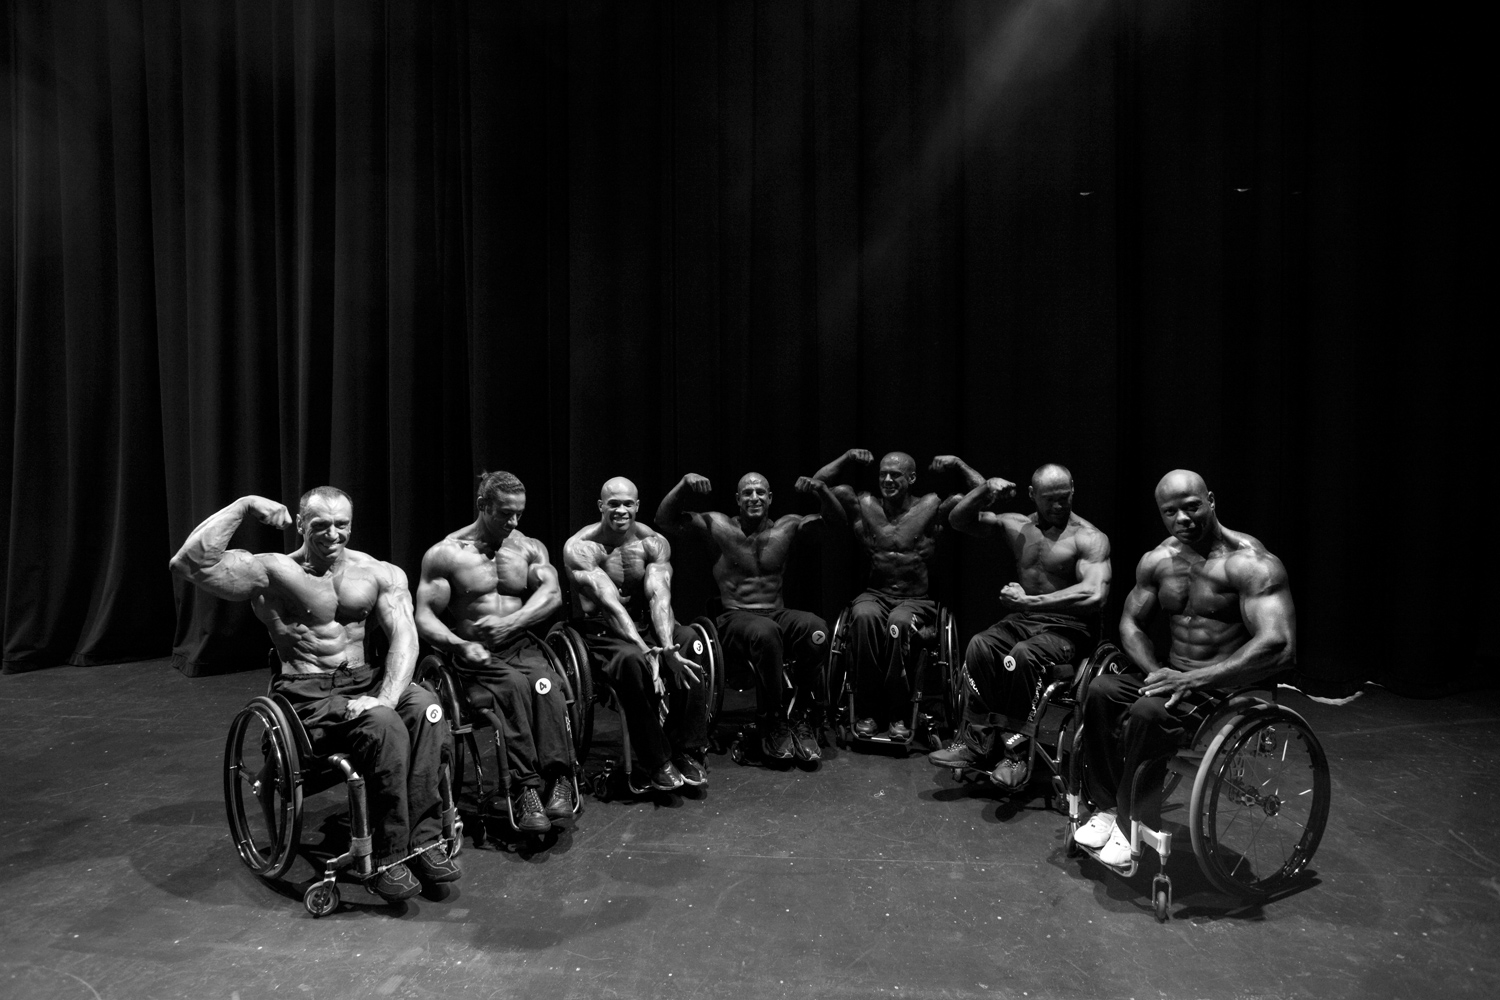 Professional wheelchair bodybuilders backstage before a pro show in Houston on Oct. 15, 2011.